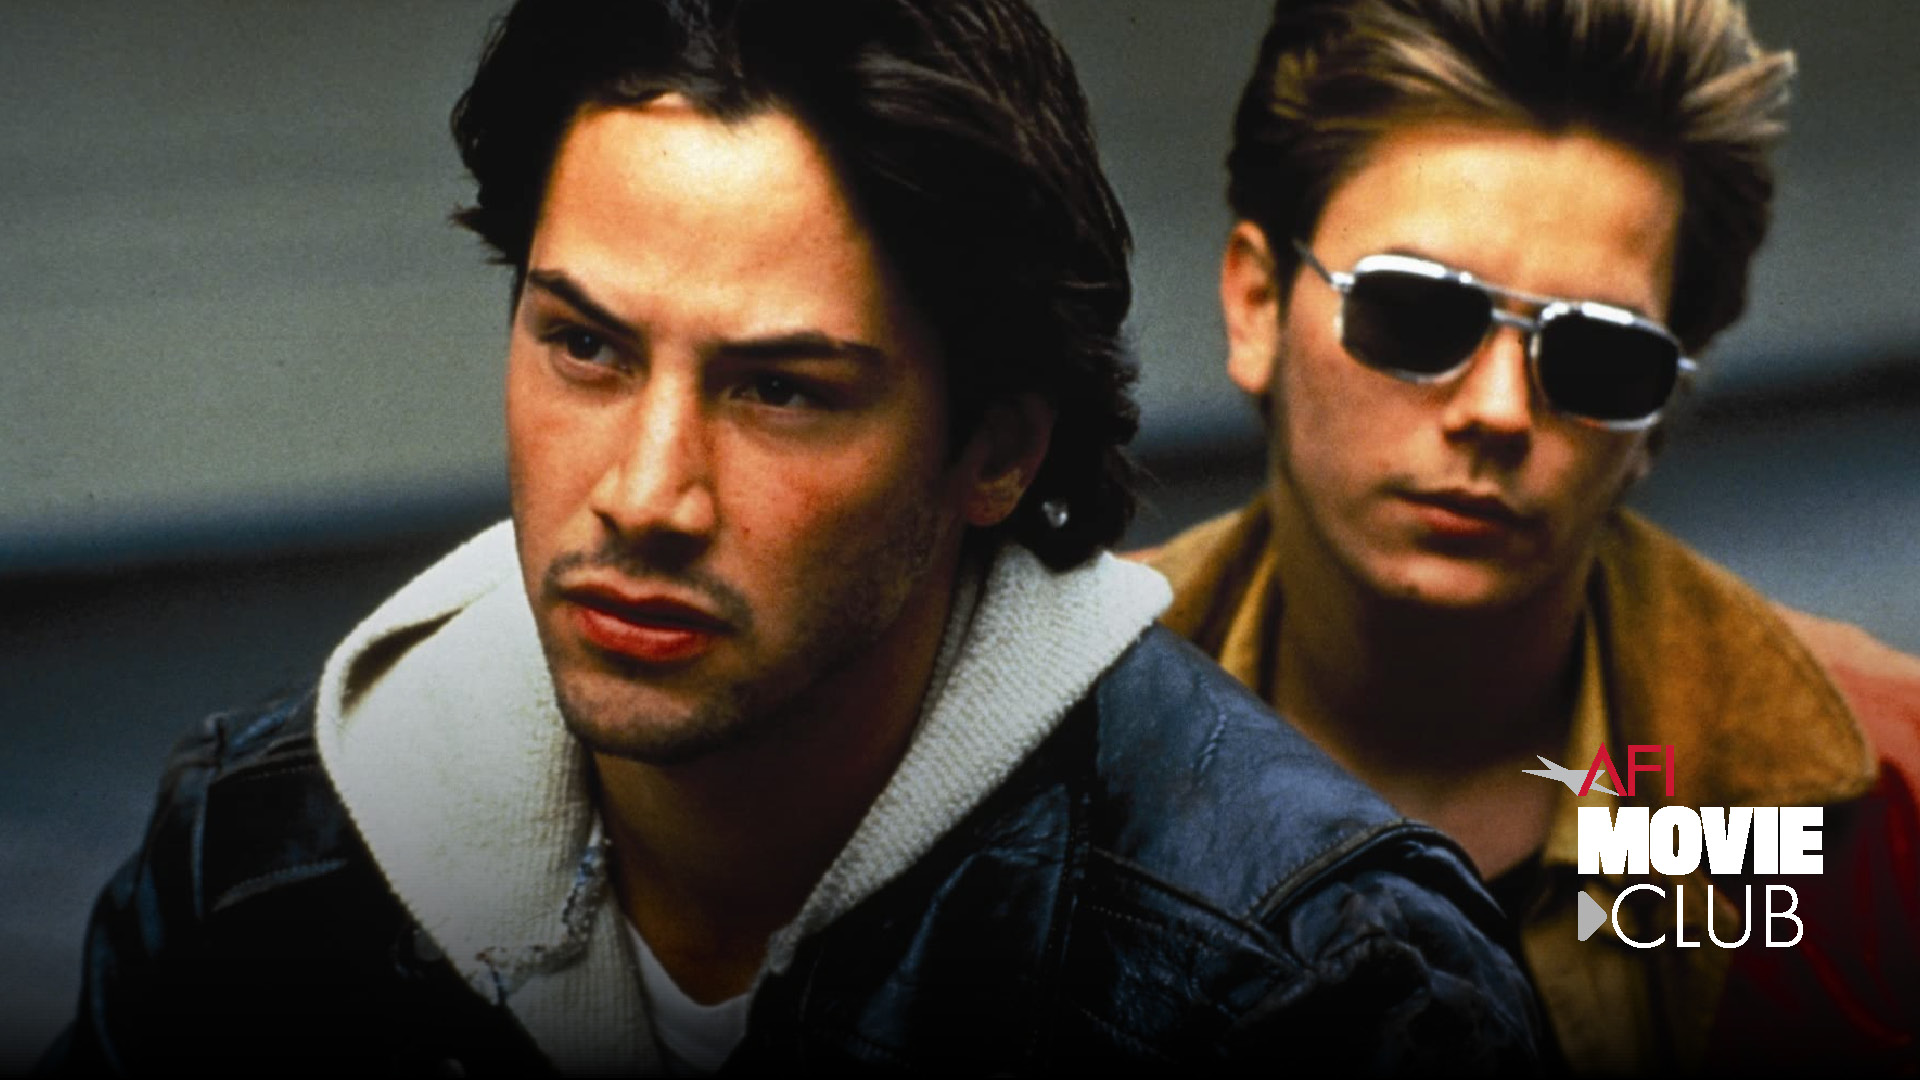 Pride Month Movie Guide - MY OWN PRIVATE IDAHO – Michael "Mikey" Waters and Scott Favor